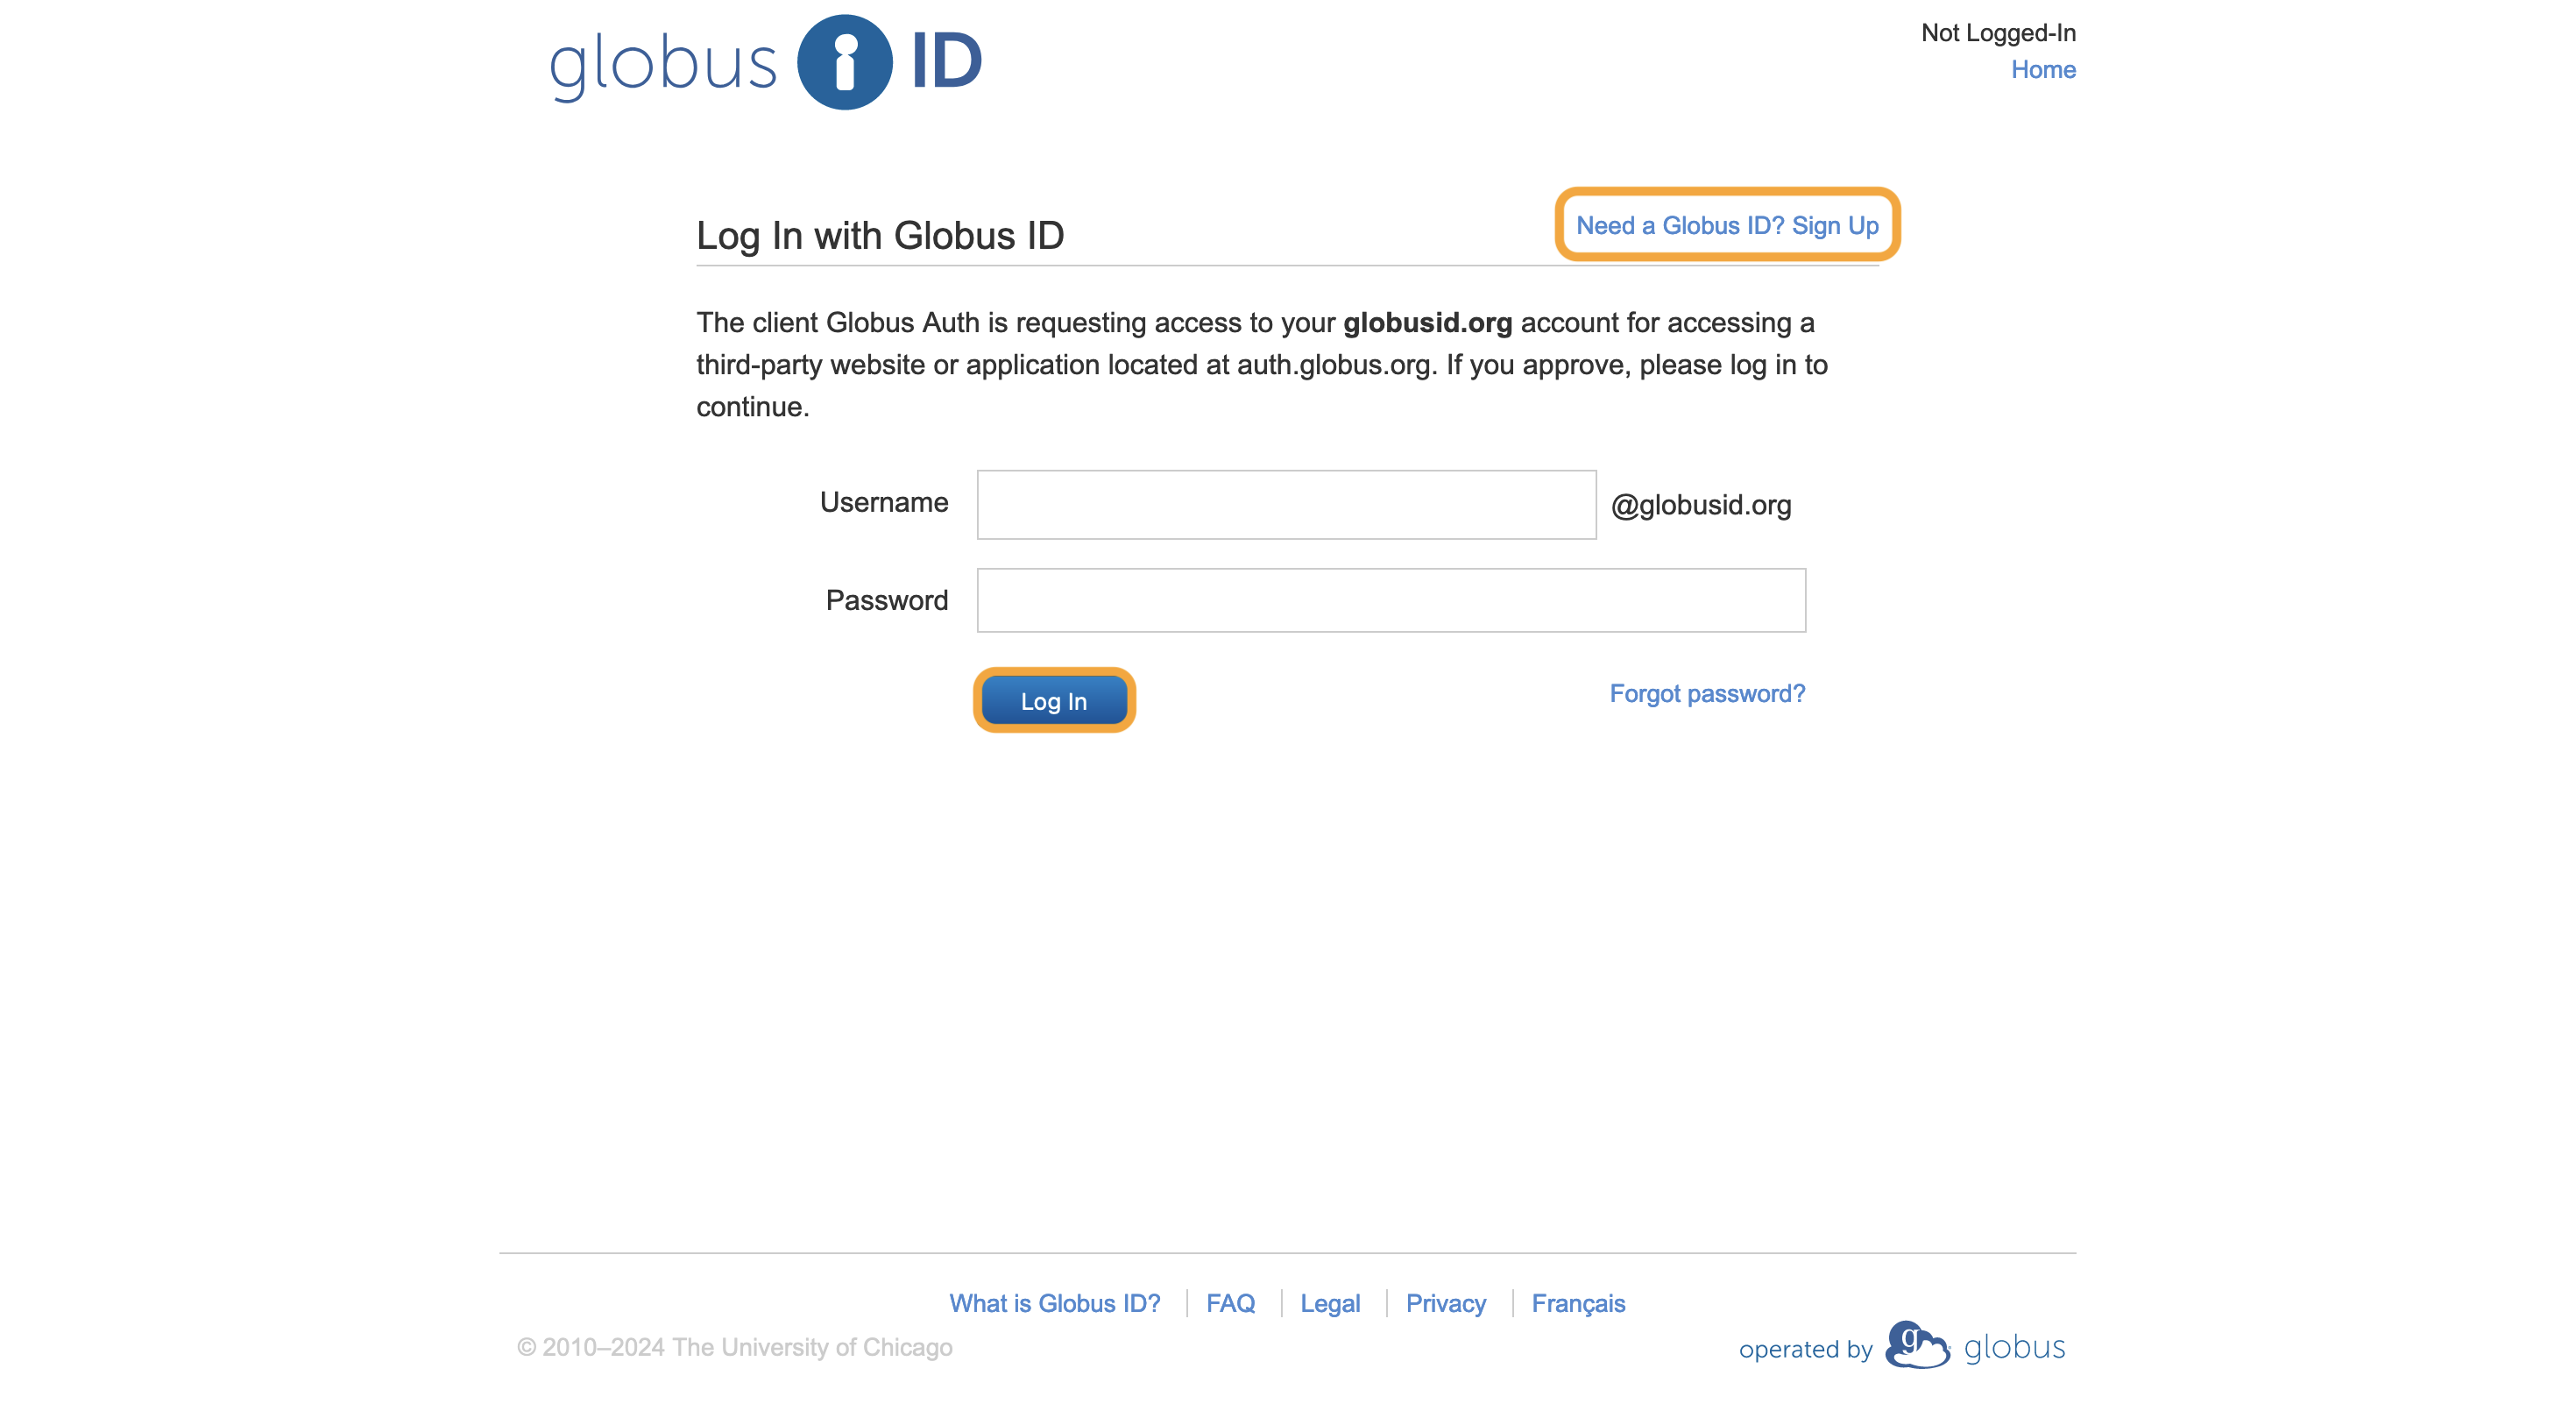 Globus ID login page with the Log In button and "Need a Globus ID? Sign Up" highlighted.